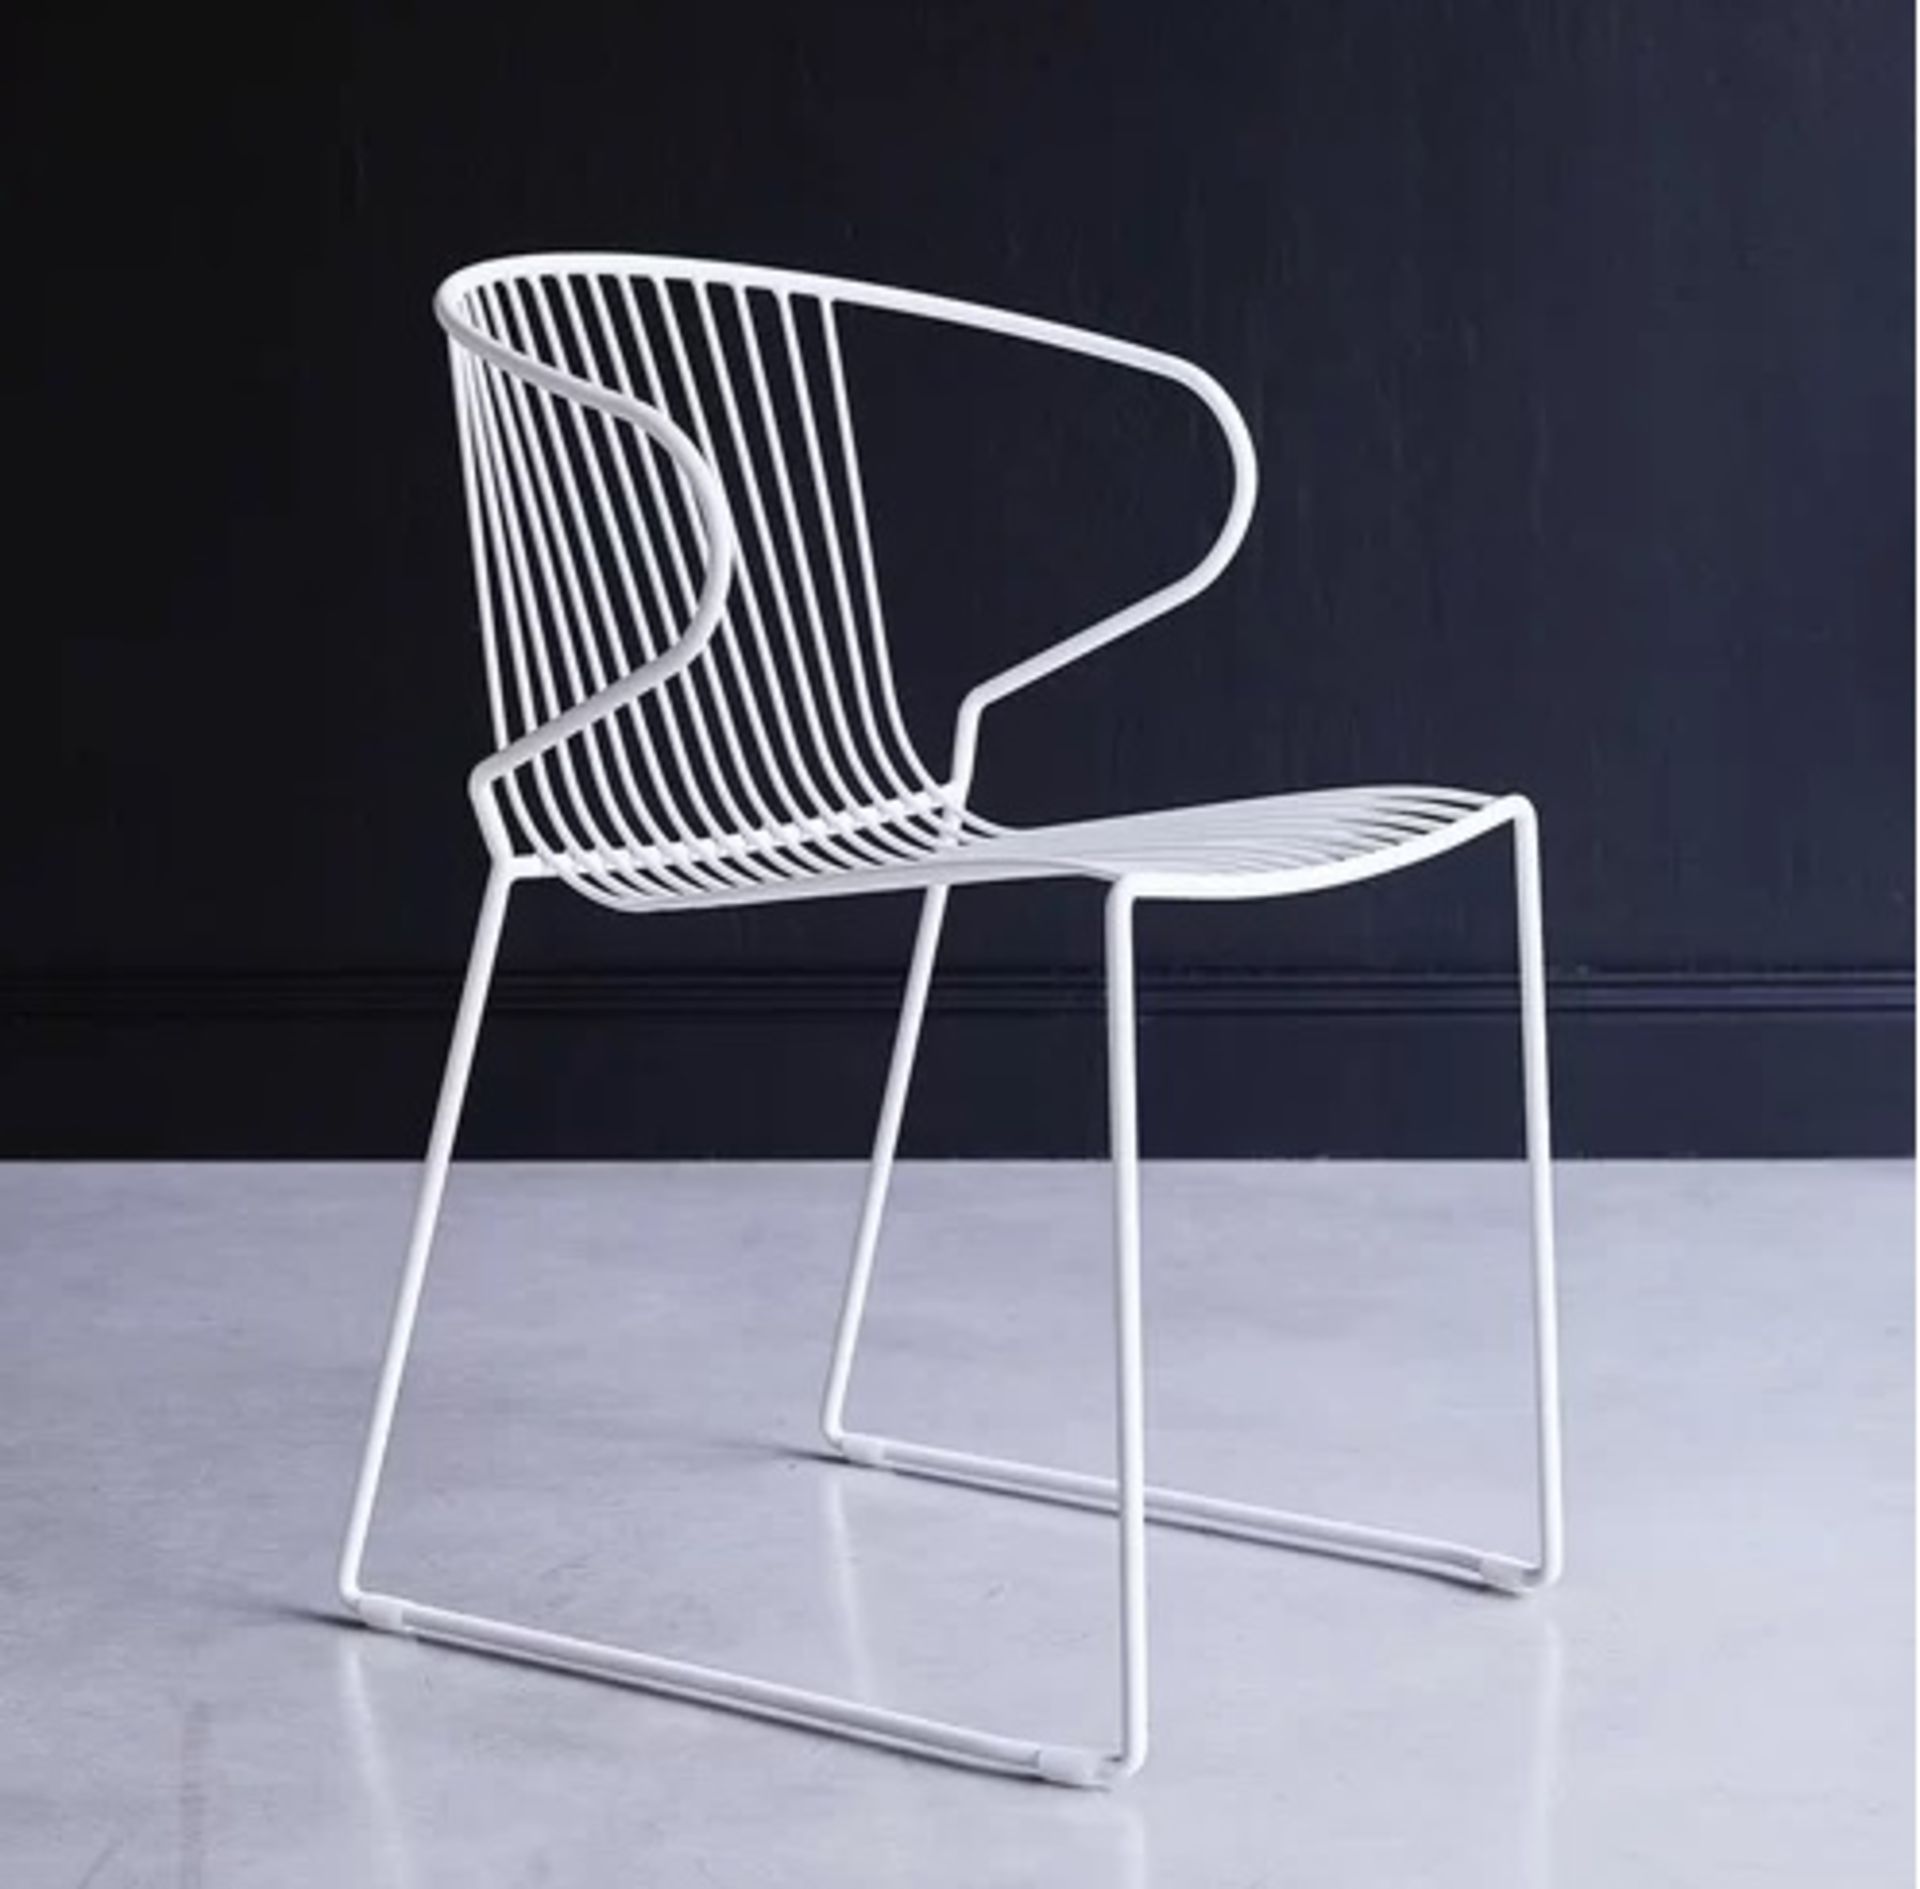 Zen Dining Chair Composed Of A Metal Structure This Chair Can Be The Perfect Aid For Pleasant